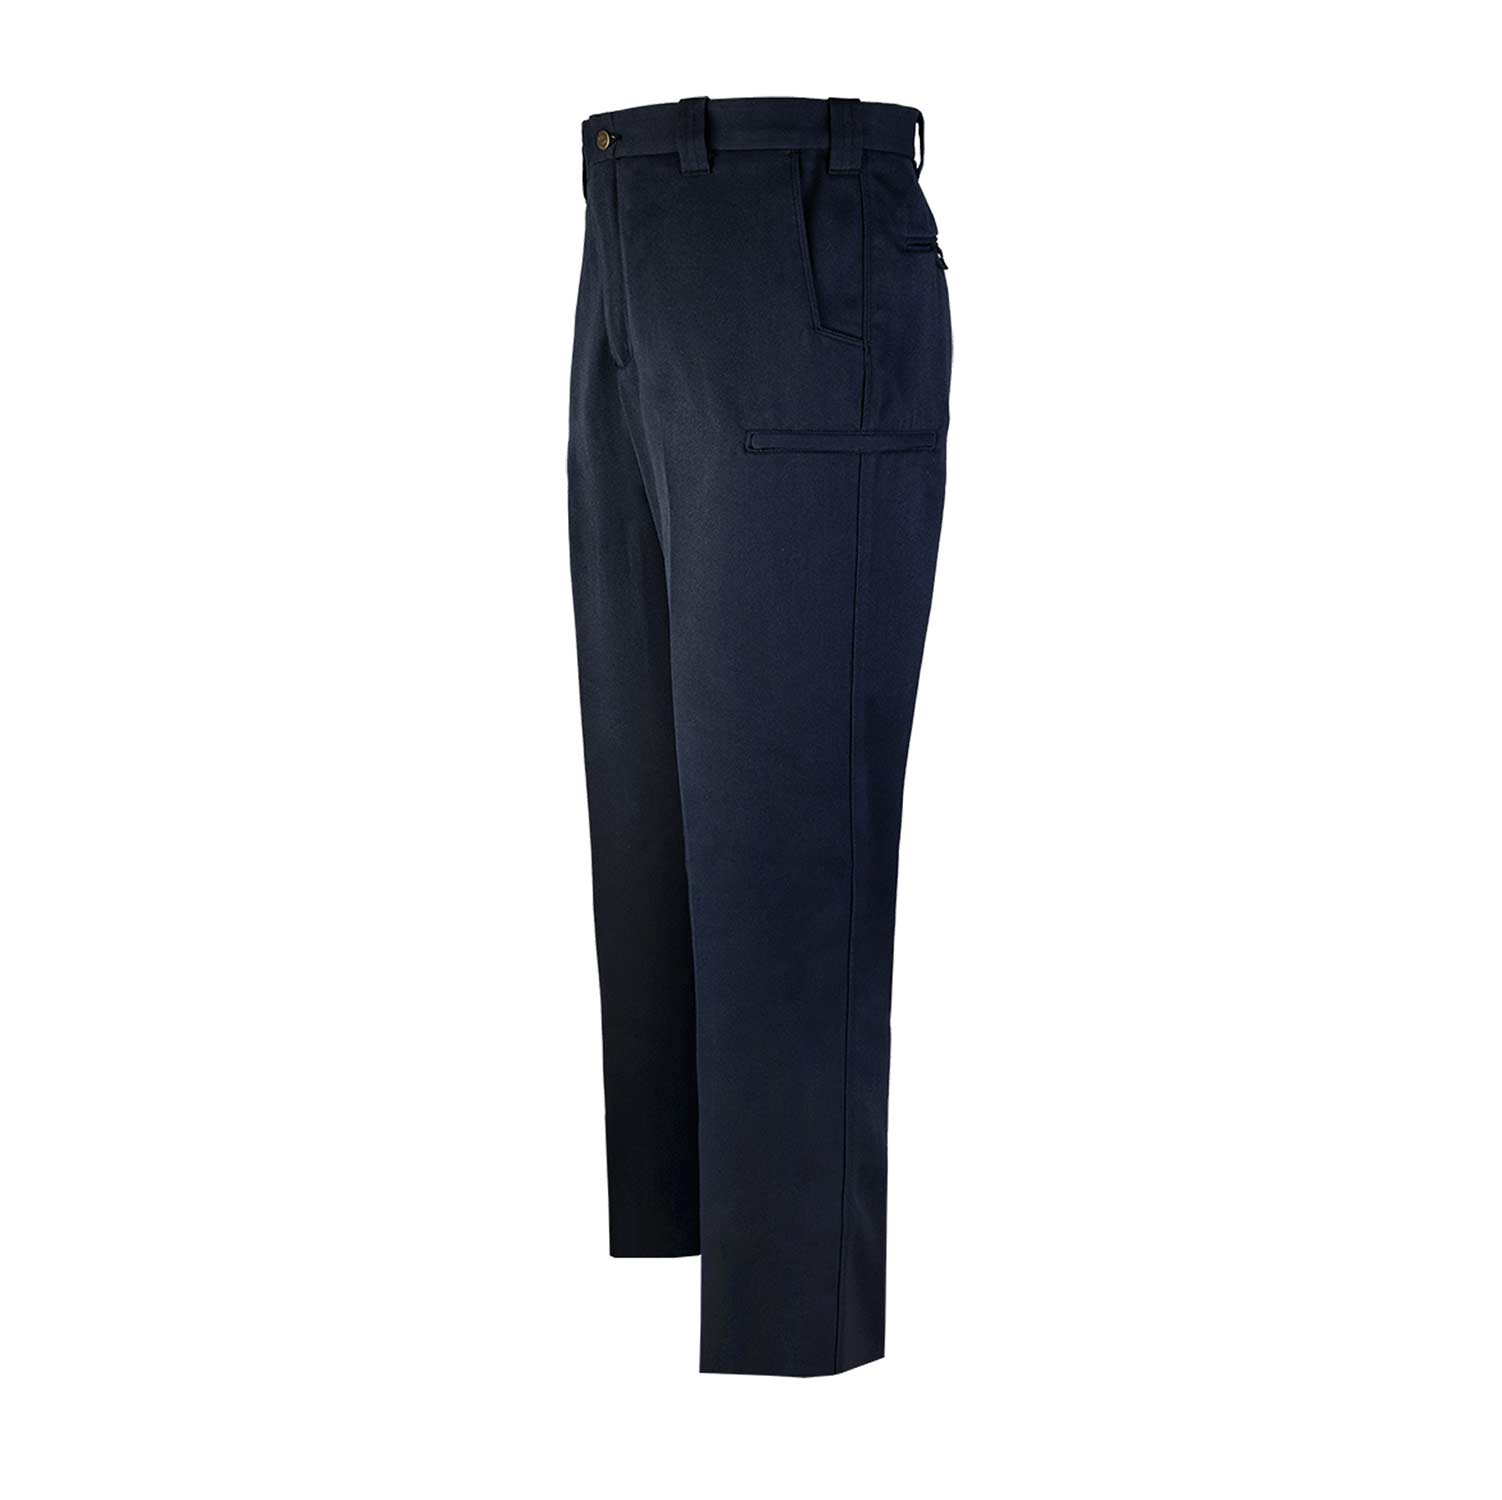 Cross FR Womens 6 Pocket Station Pant by Flying Cross